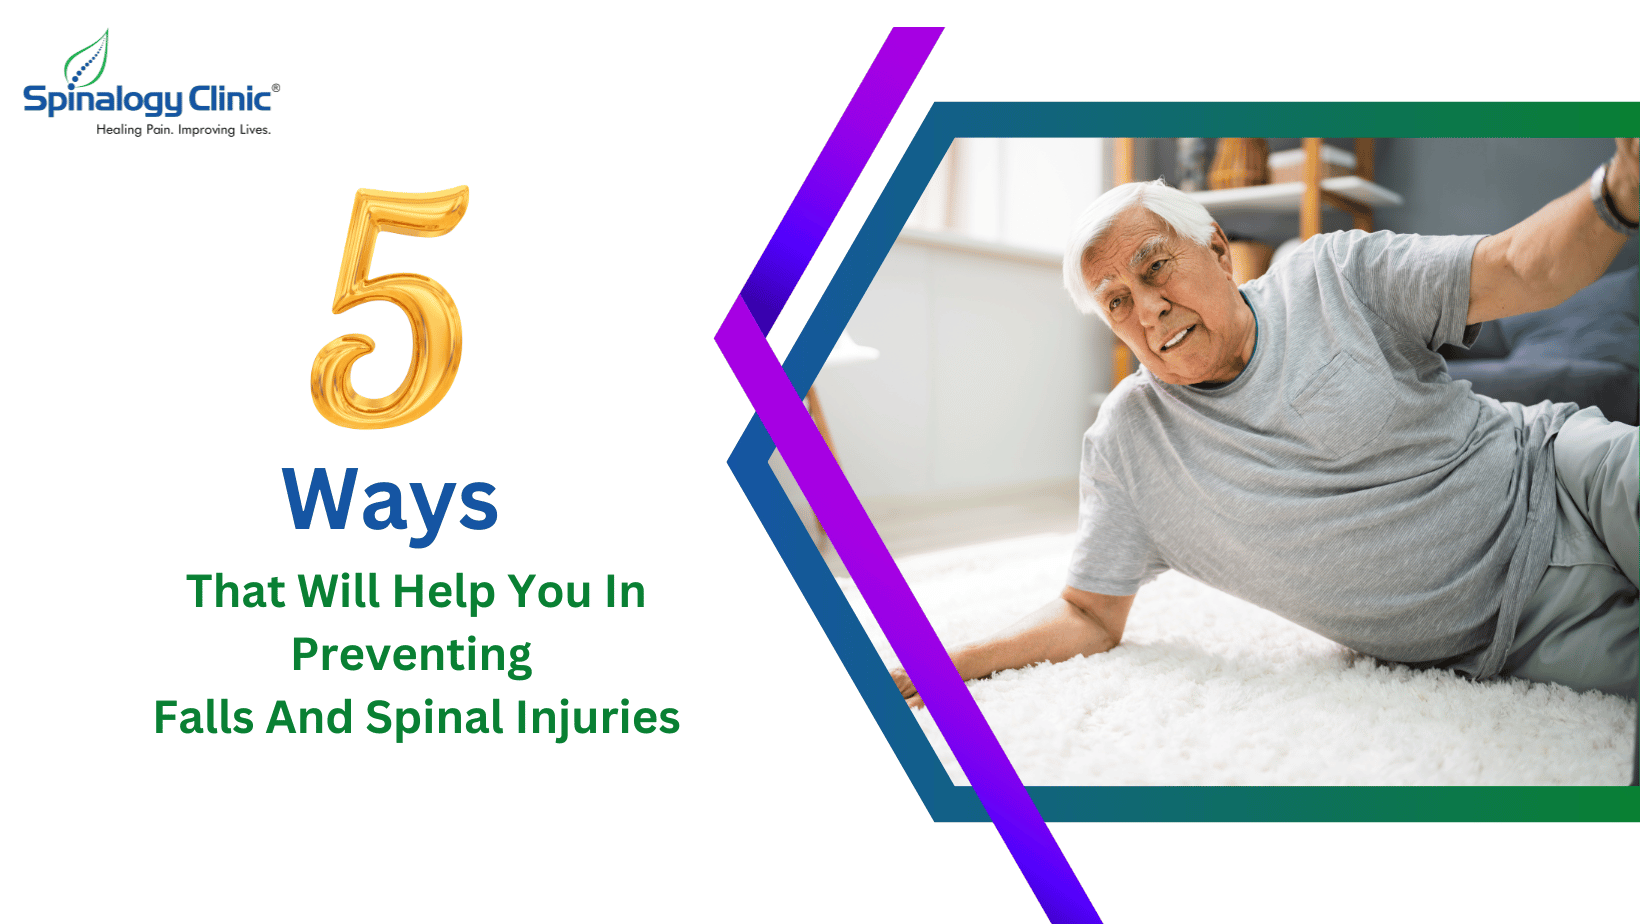 5 Ways That Will Help You In Preventing Falls And Spinal Injuries